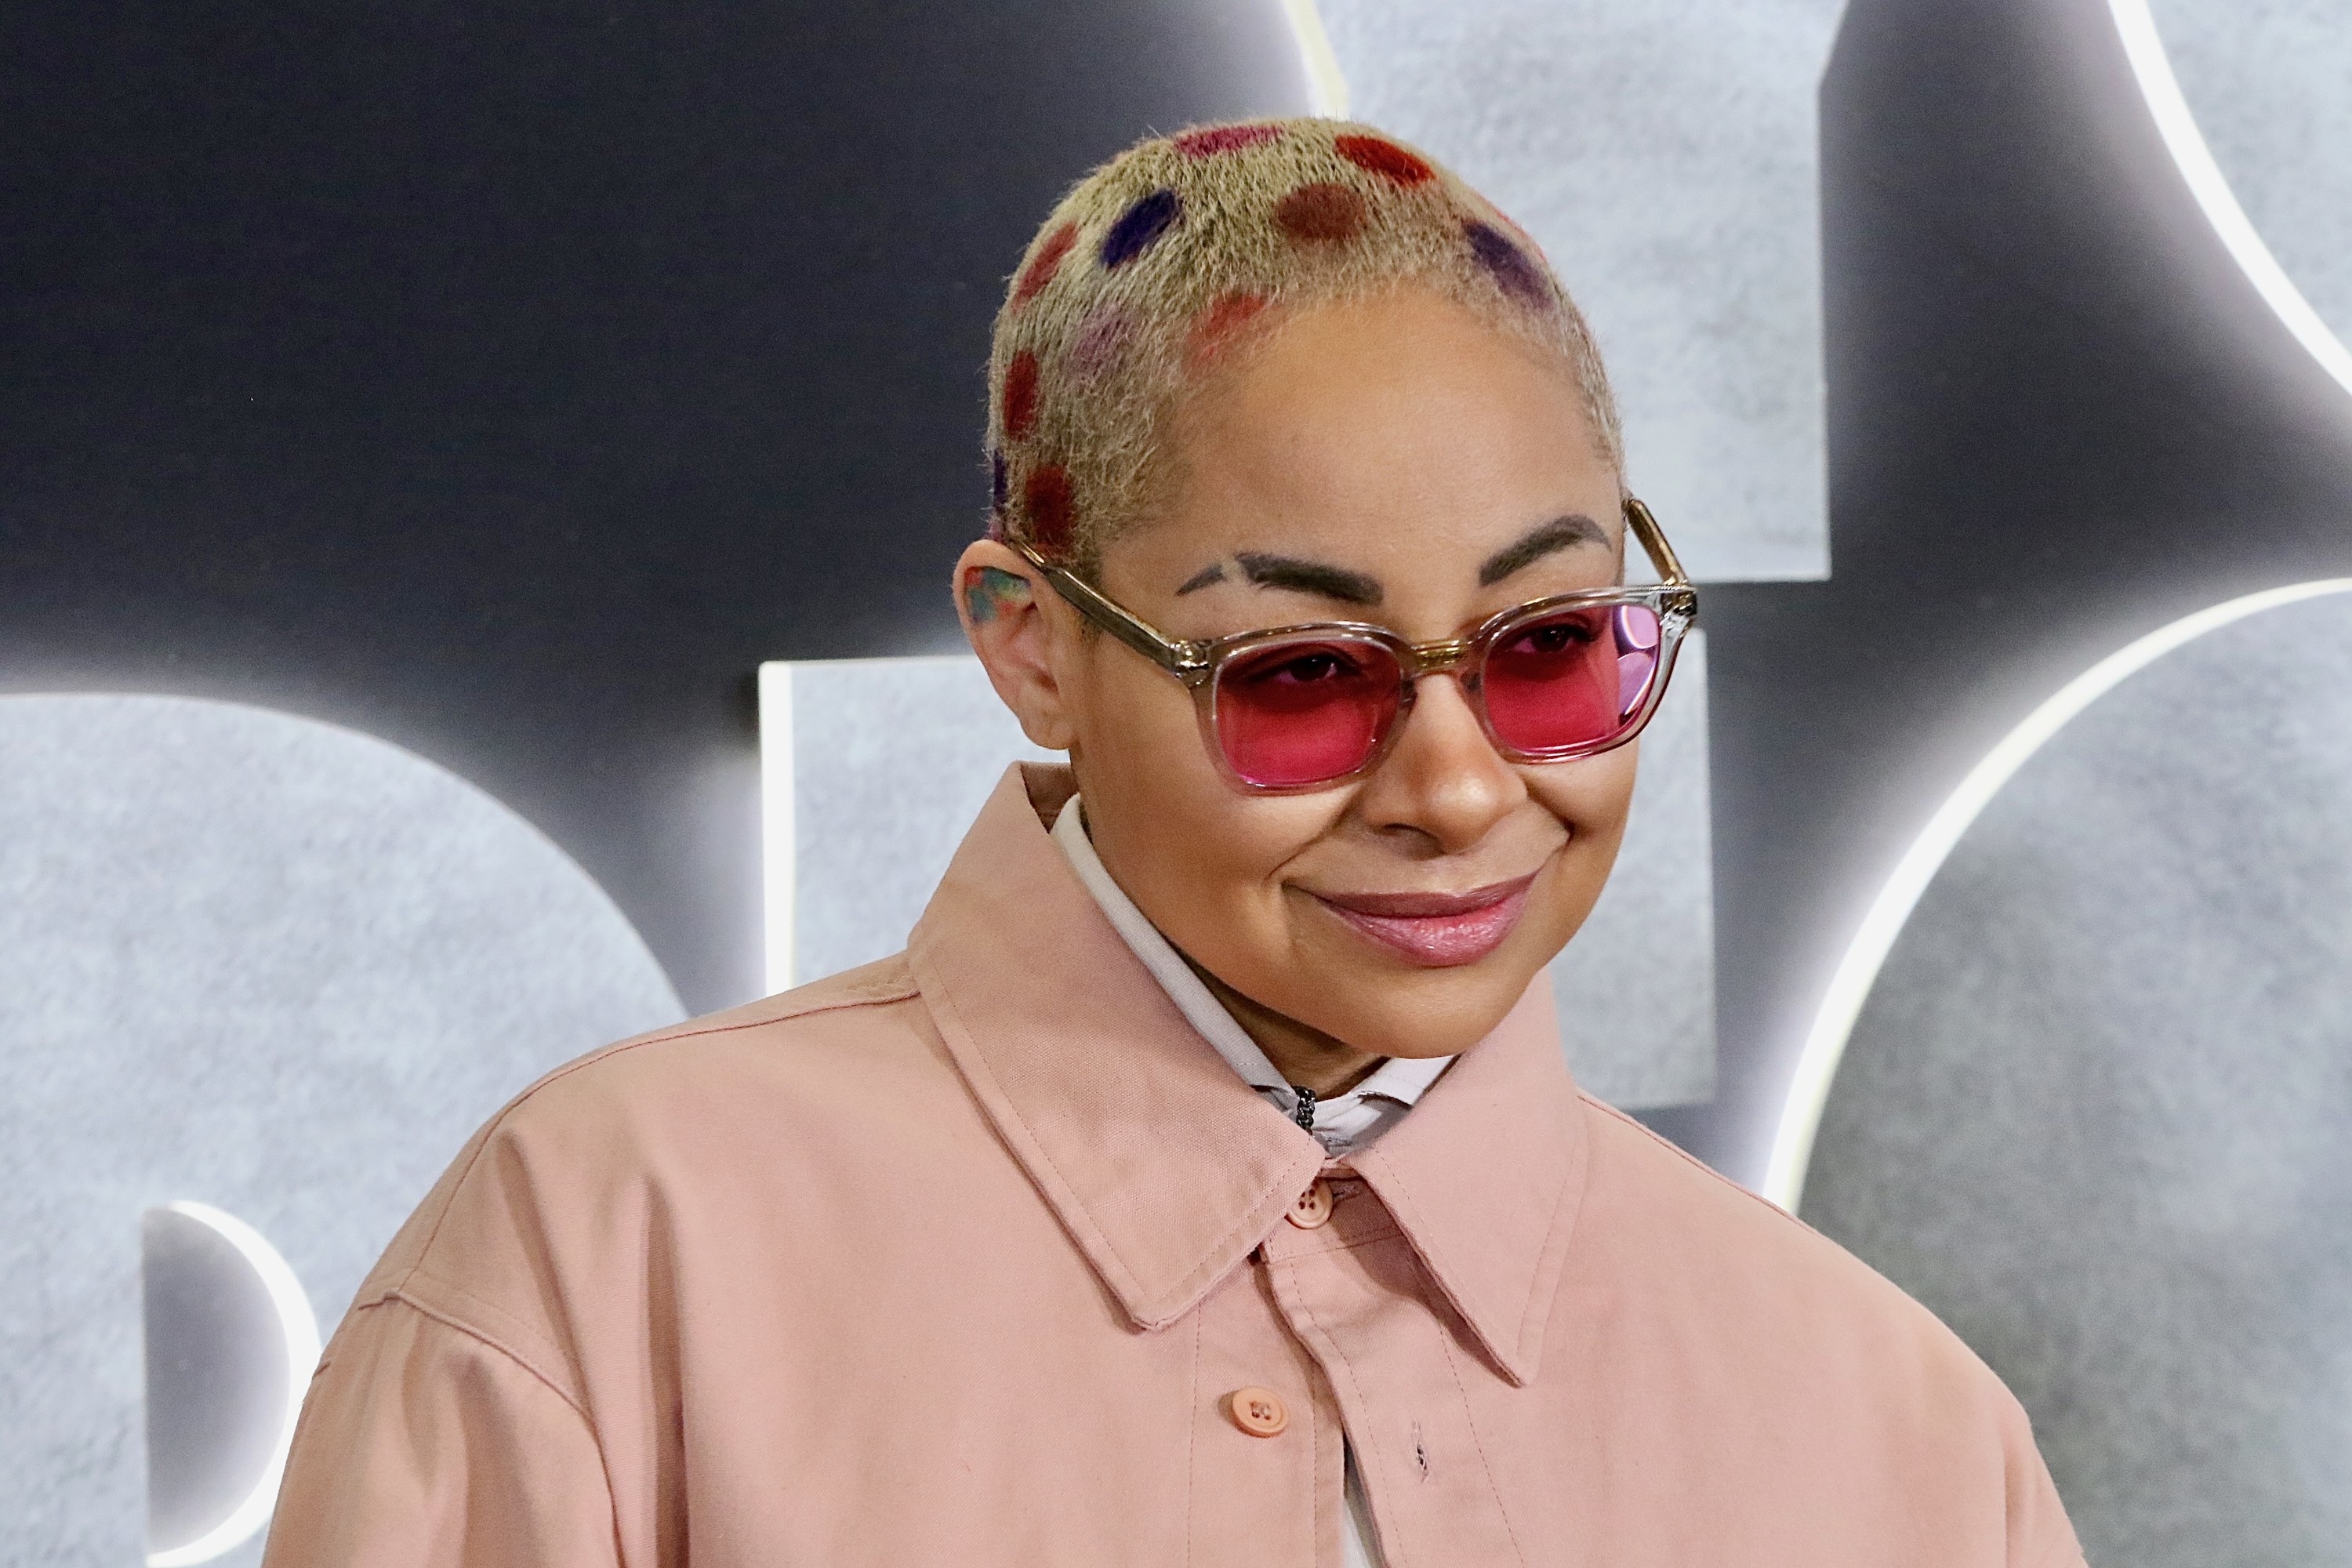 raven symone in a light pink jacket and red sunglasses